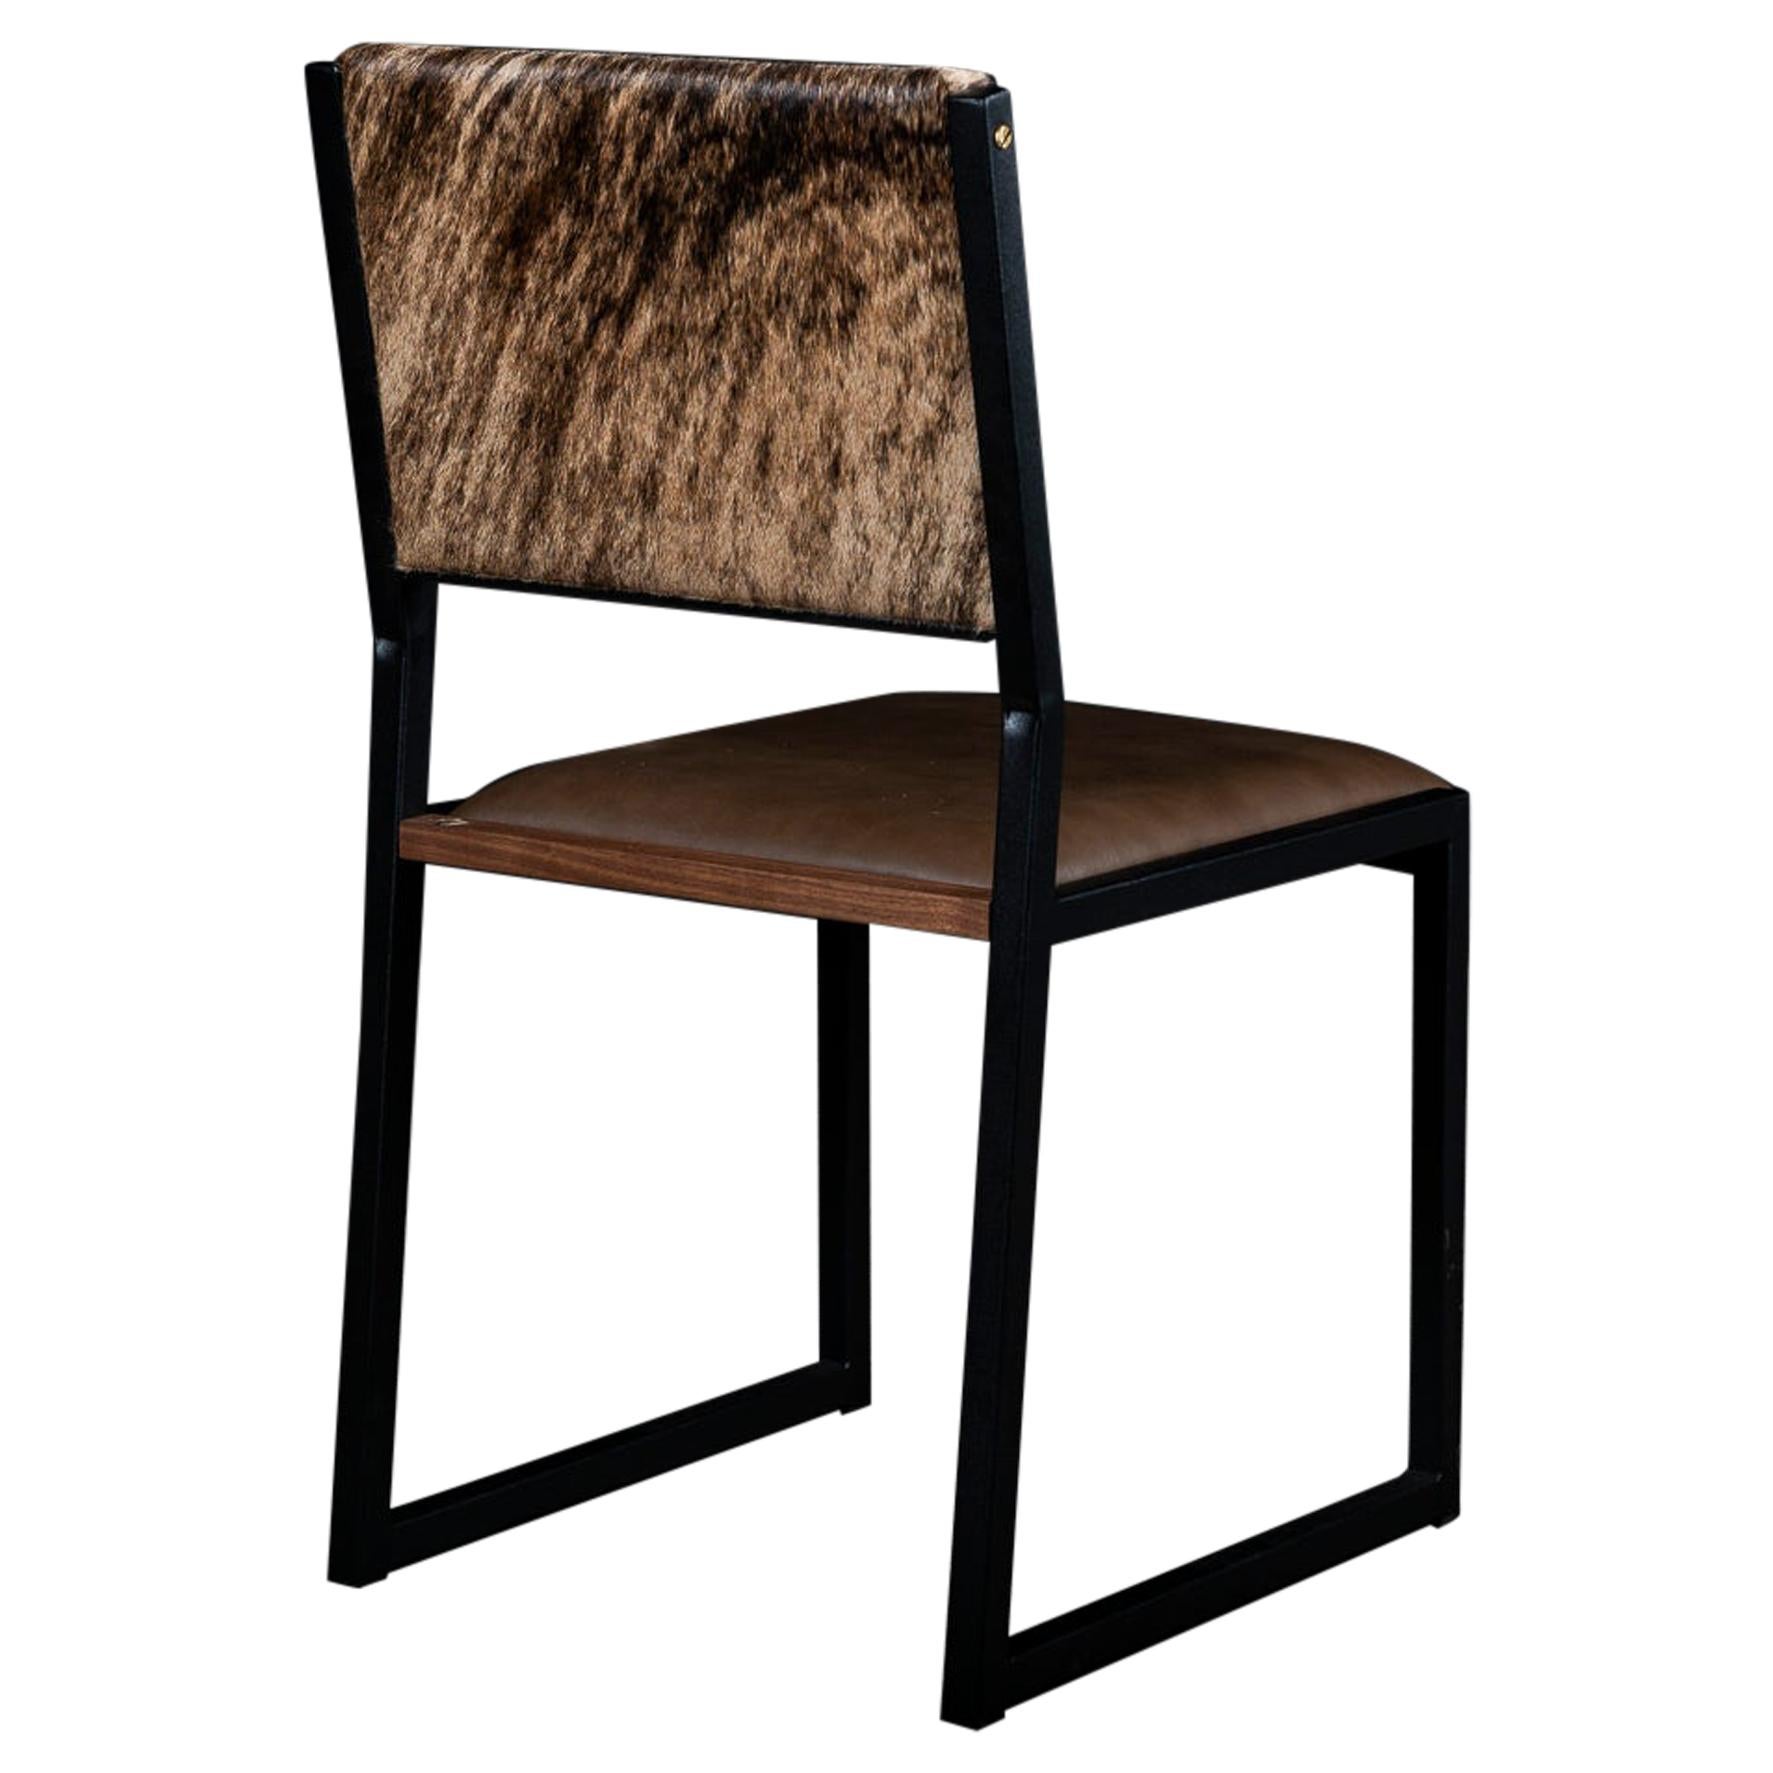 Shaker Modern Chair by Ambrozia, Walnut, Brown Leather, light brown brindle hide